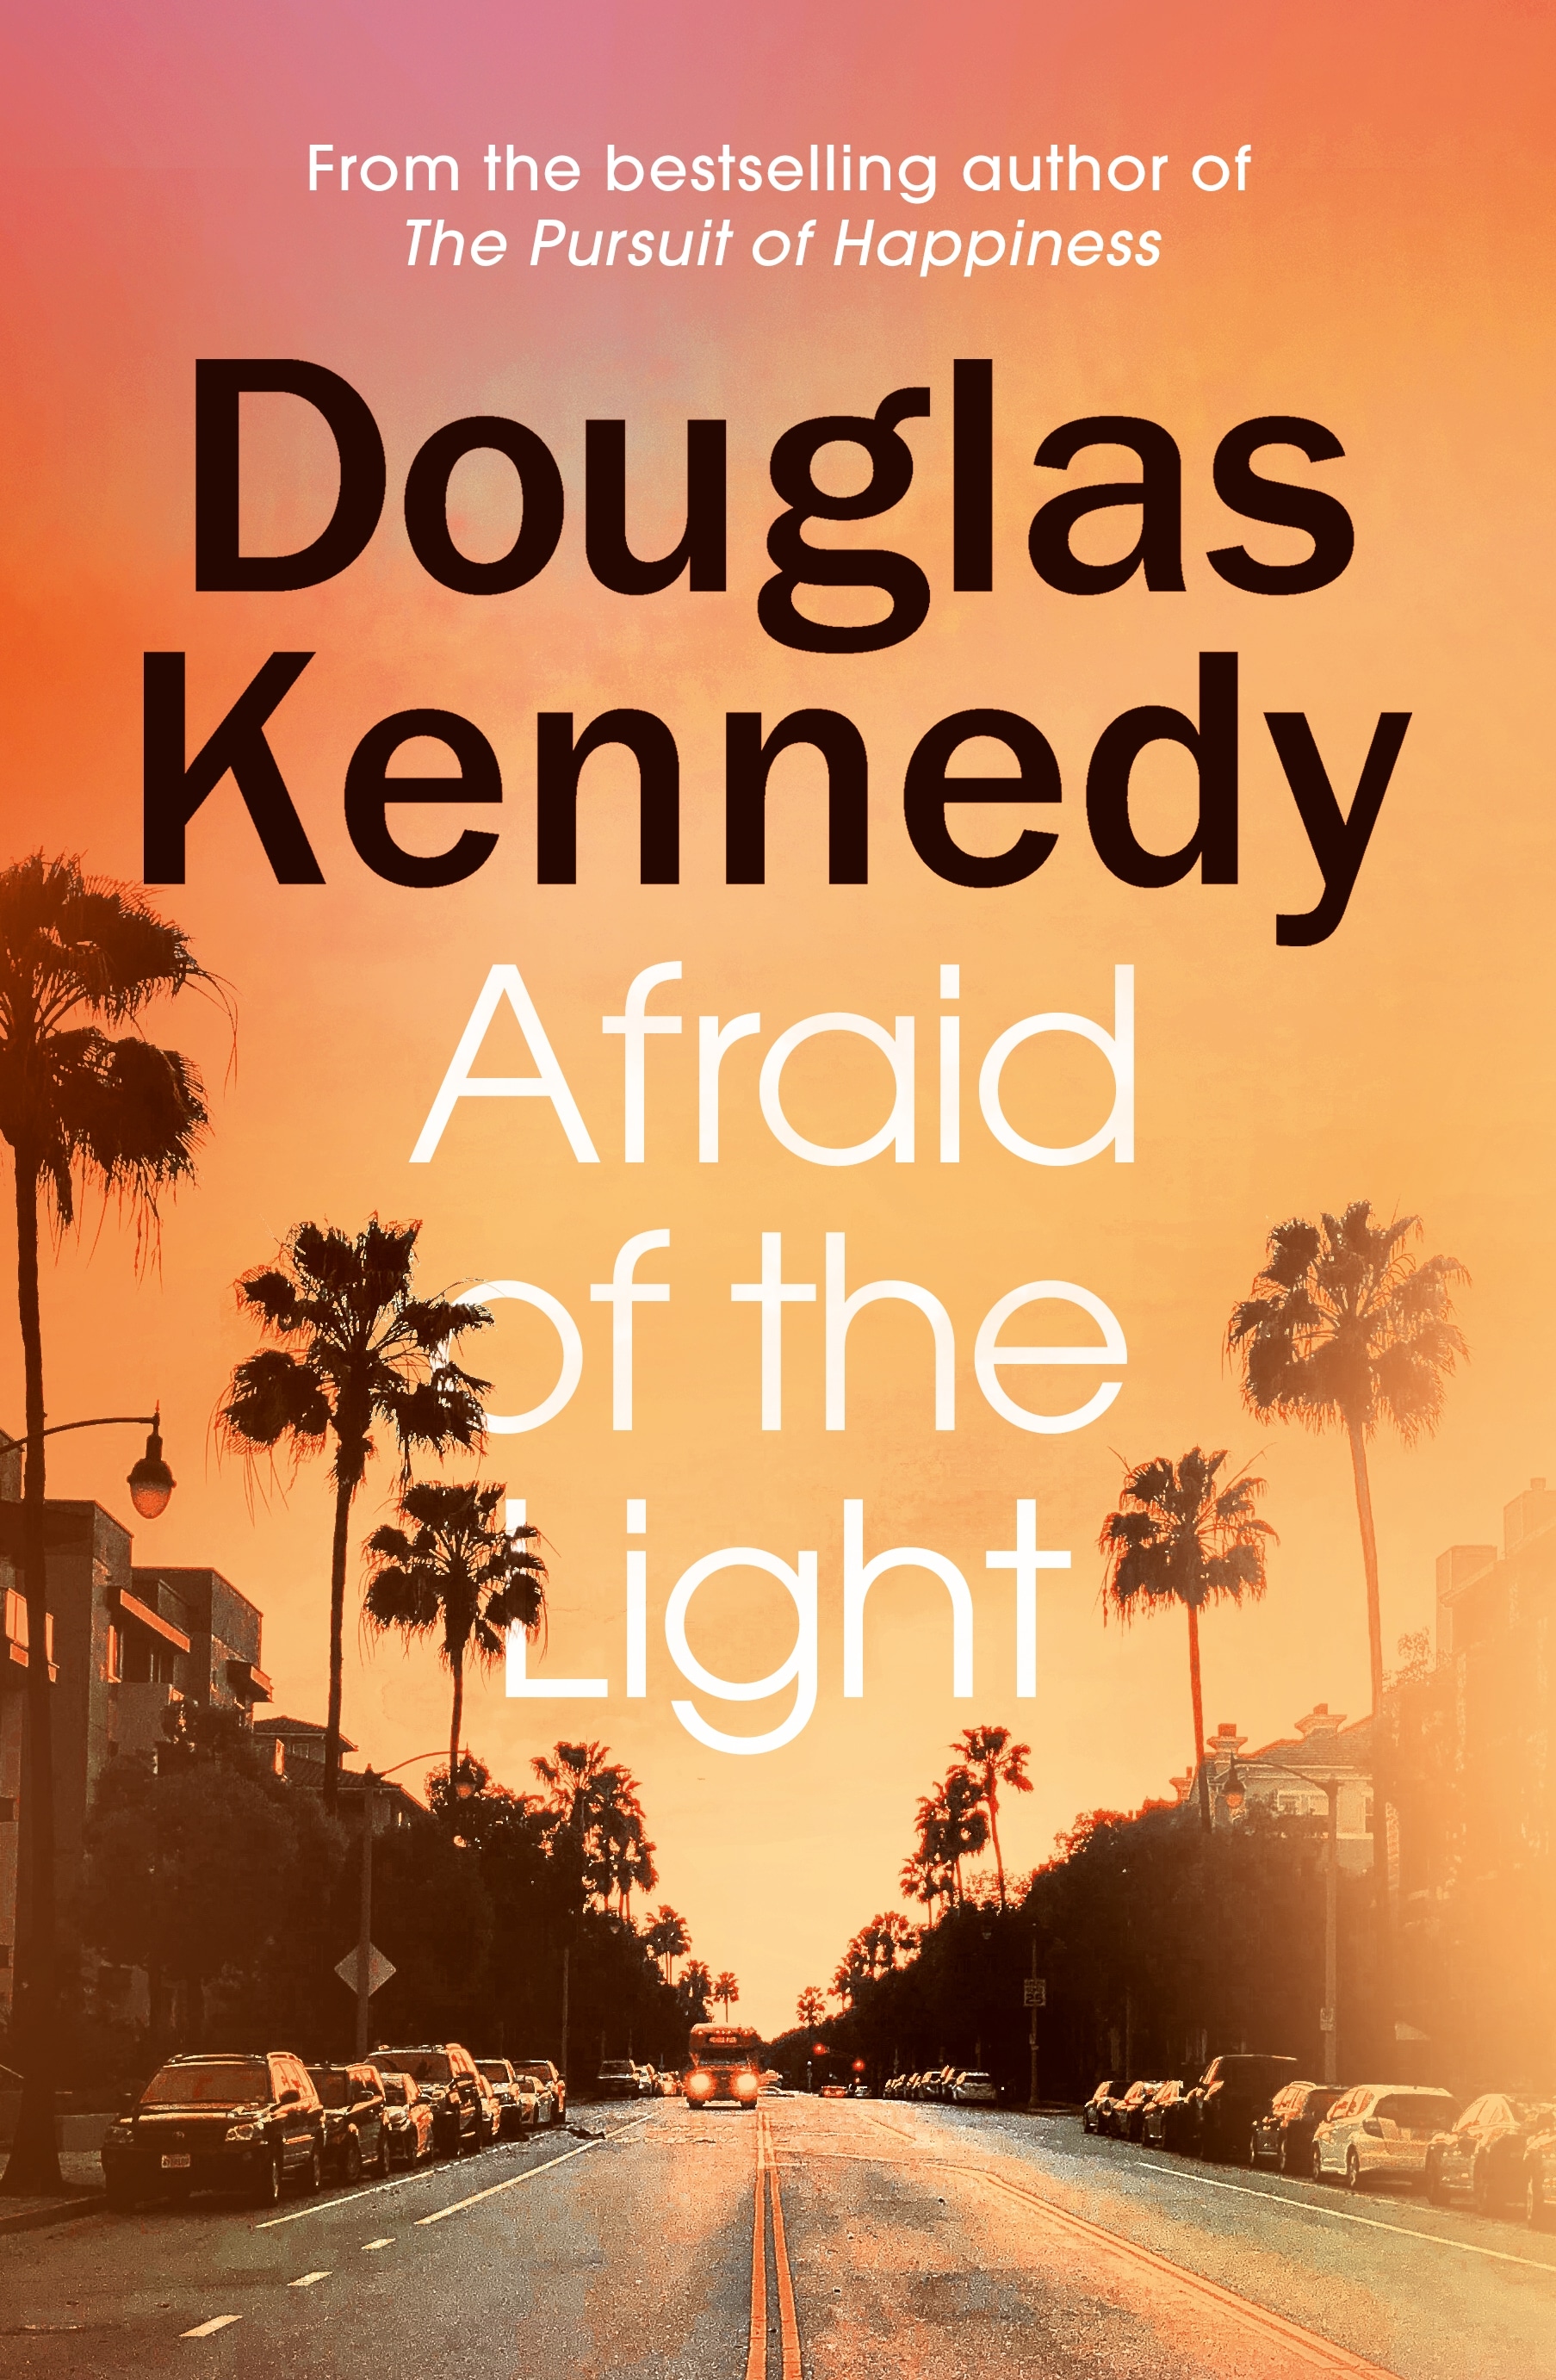 Book “Afraid of the Light” by Douglas Kennedy — July 8, 2021